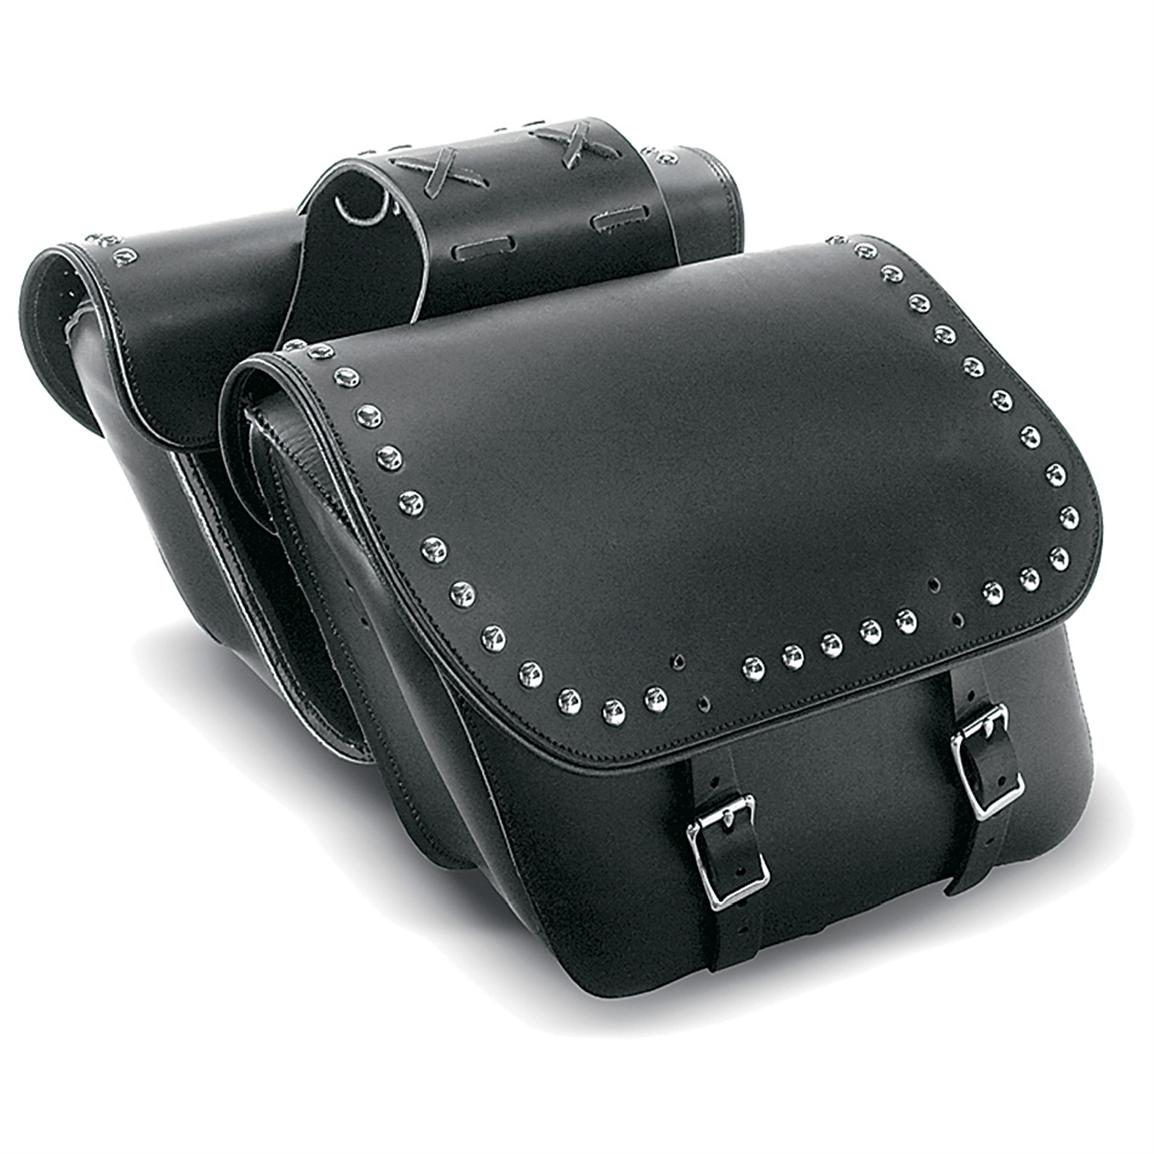 Carroll® Large leather Motorcycle Saddlebags - 149664, Racks & Bags at